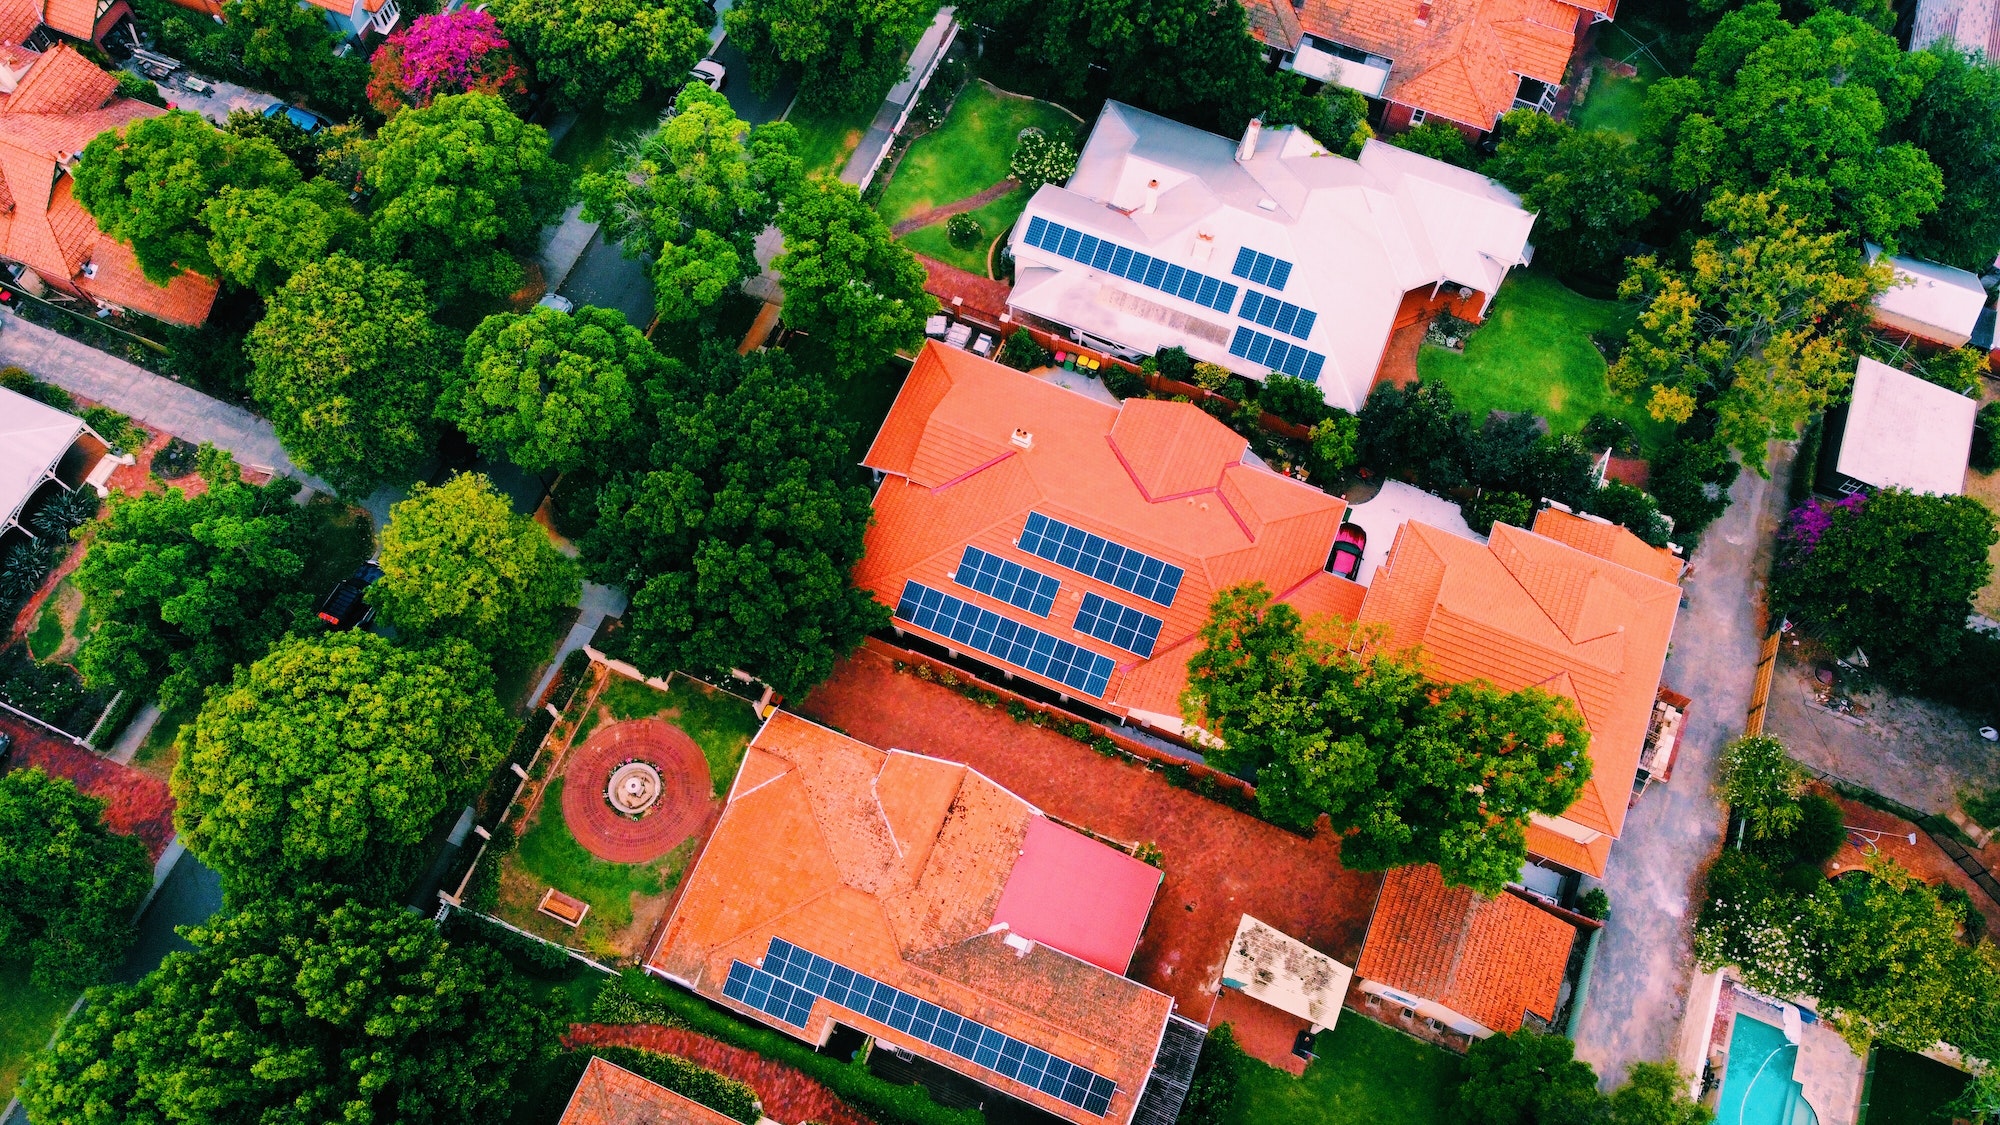 Aerial view of solar panels on the roofs